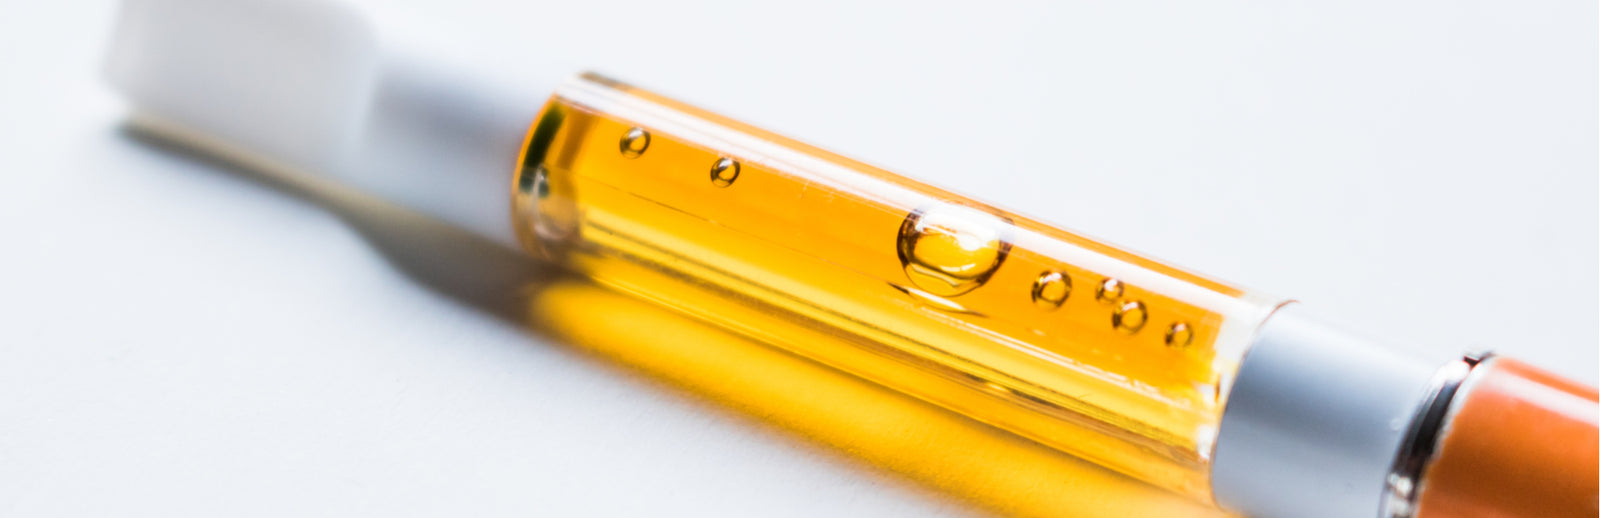 What is an Oil Pen and Why is it So Popular? - Read More - HEMPER